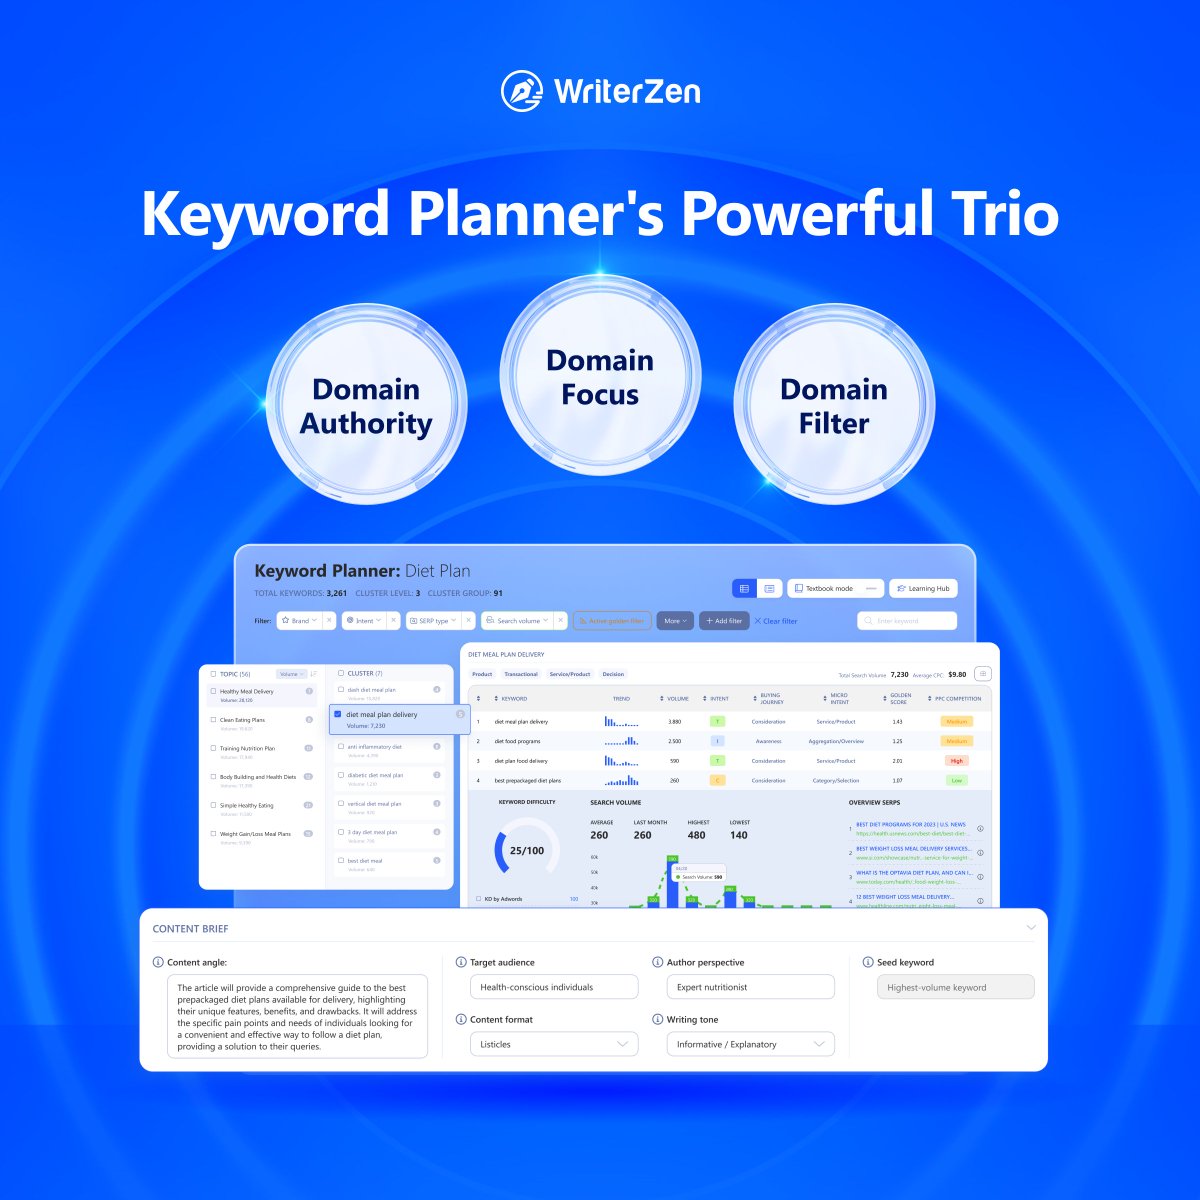 ✨ Introducing Keyword Planner’s Powerful Trio - where keyword research, competitive analysis, and content optimization are simplified.

#KeywordPlanner #ContentGap #DomainAuthority